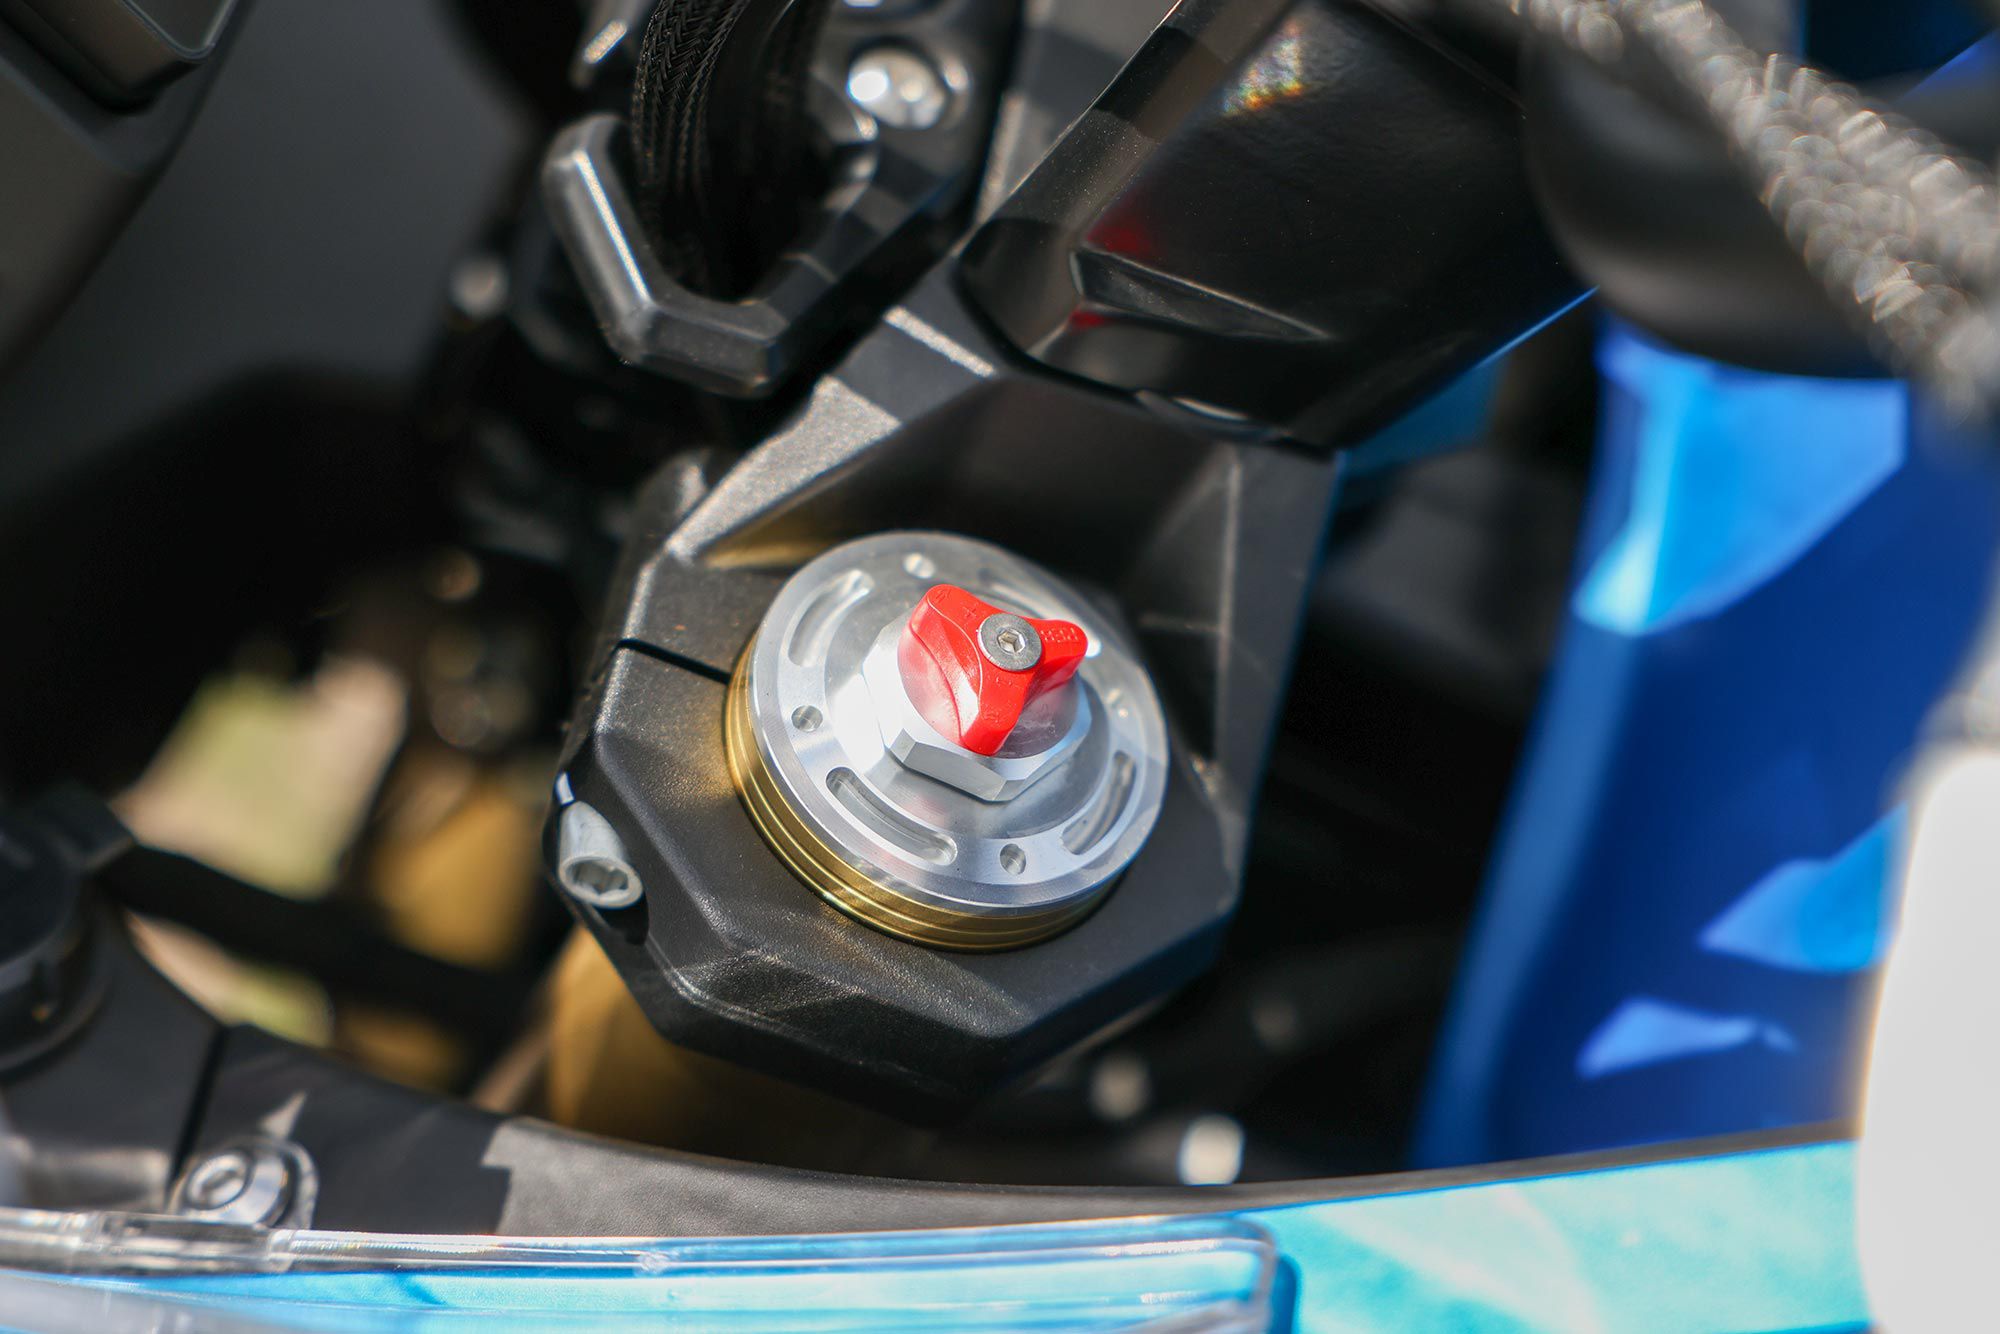 Despite the low MSRP, CFMoto’s machines aren’t short on nice features. The 650 Adventura’s fork features 12 clicks of rebound damping adjustment through easy-to-access knobs. The shock offers eight clicks of rebound damping adjustment, and stepless preload adjustment.